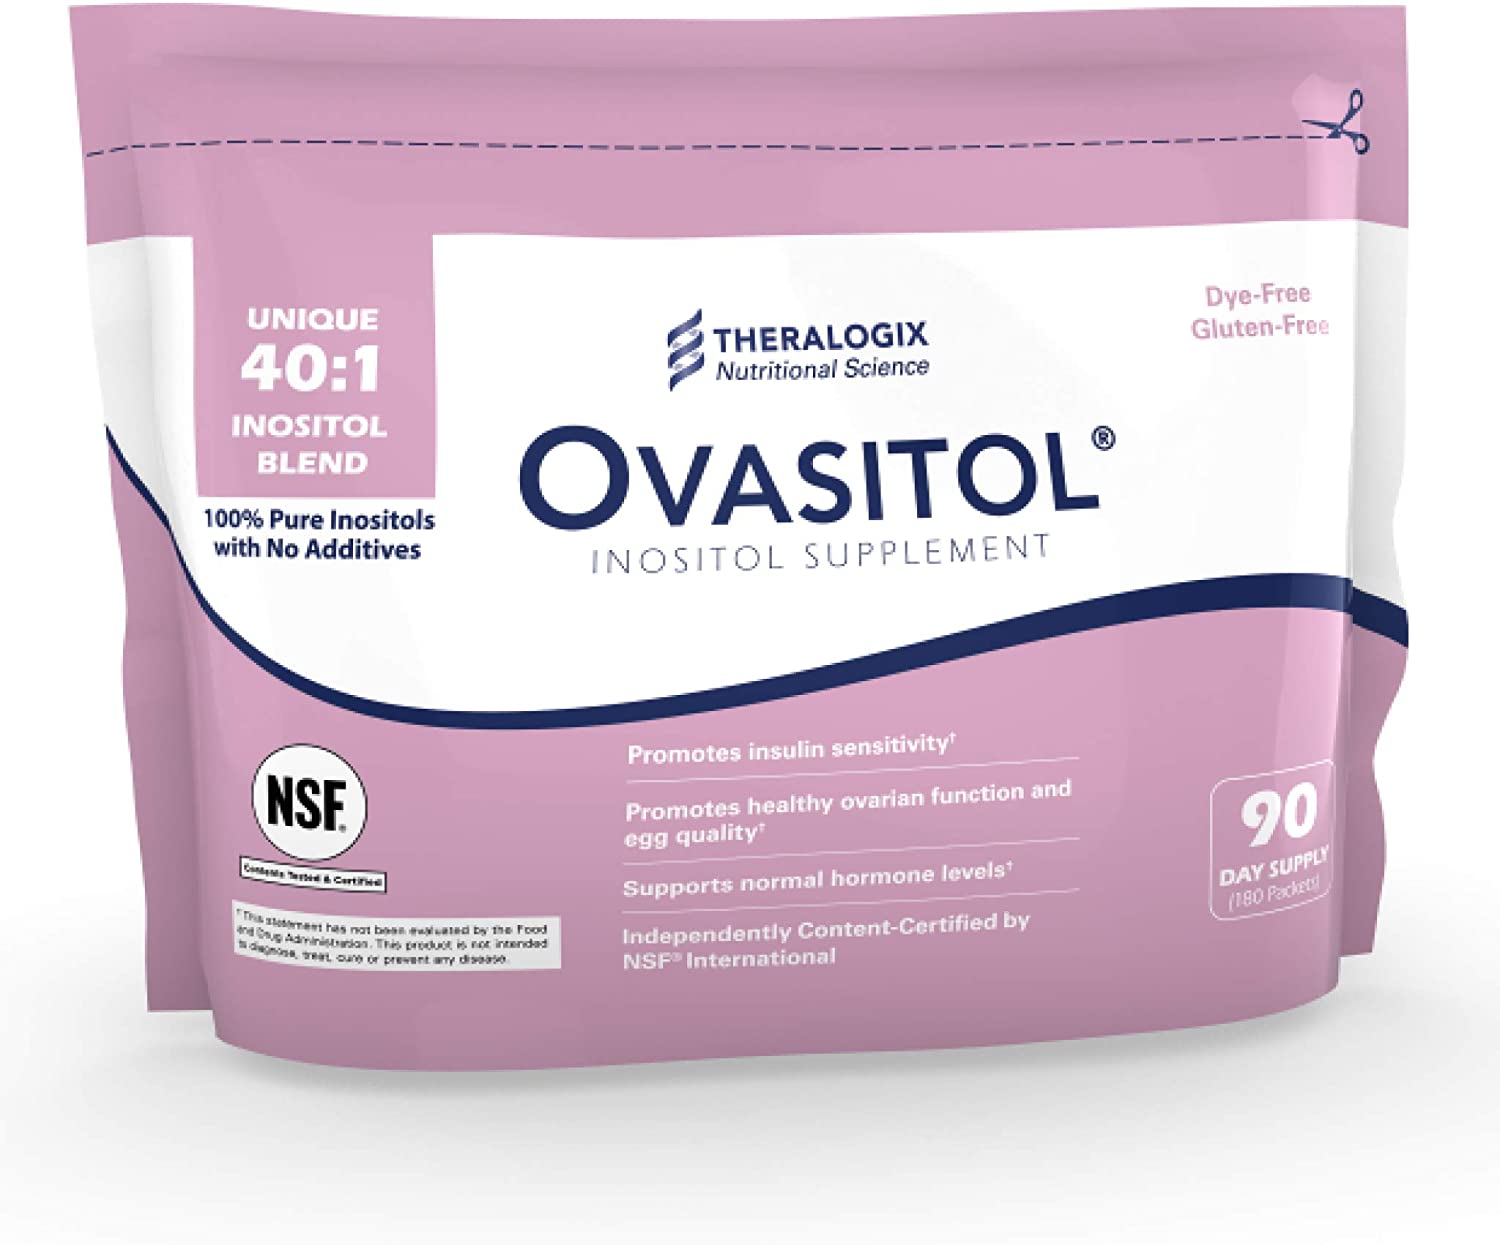 ovasitol reviews, where to buy ovasitol, ovasitol weight loss, ovasitol for pcos